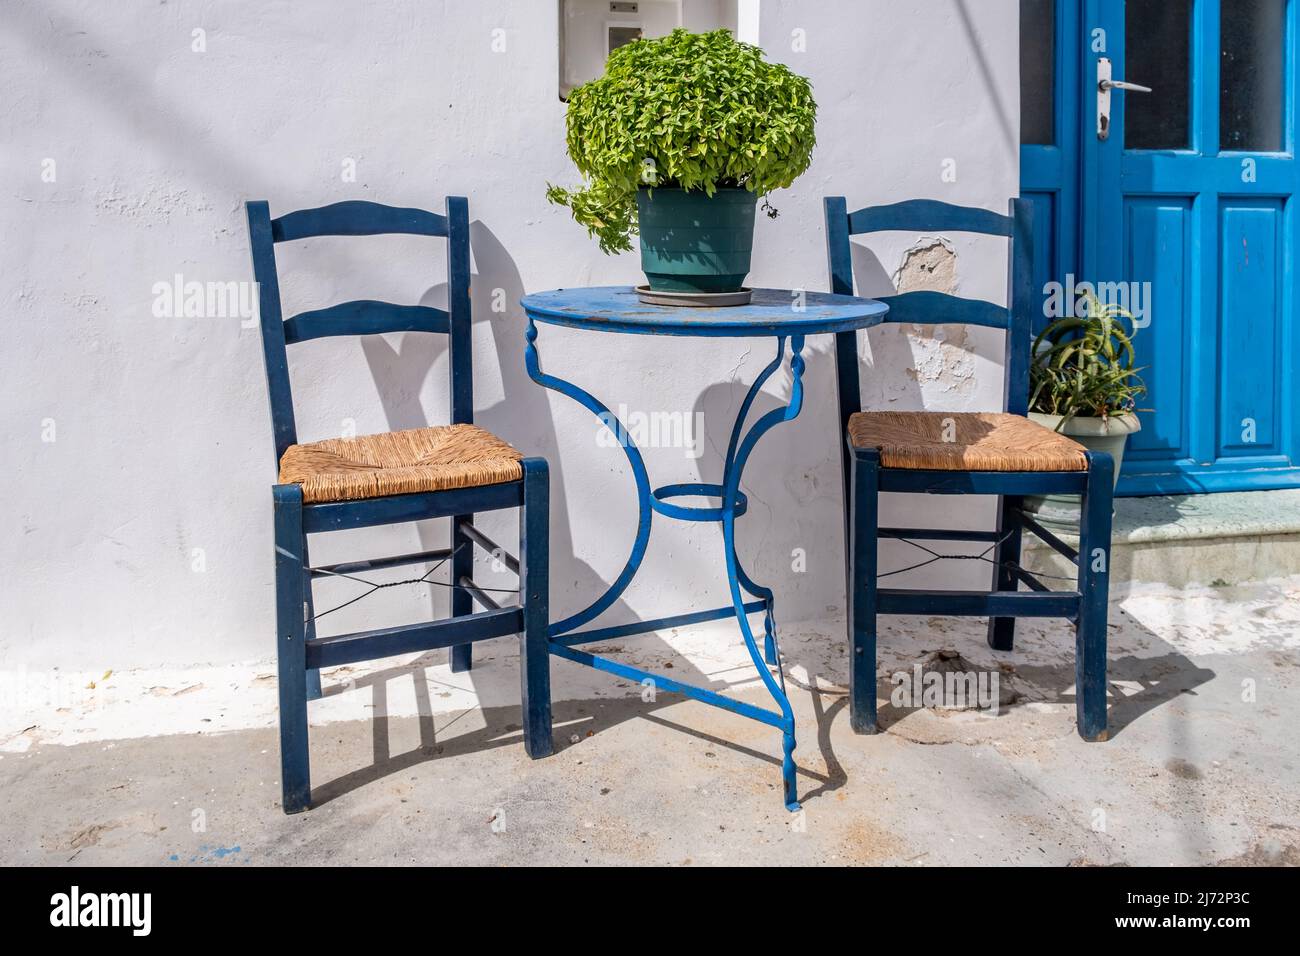 Empty blue round metal table and two wooden chairs, white traditional building wall. Outdoor cafe in a Greek island Chora, Greece. Summer sunny day. Stock Photo